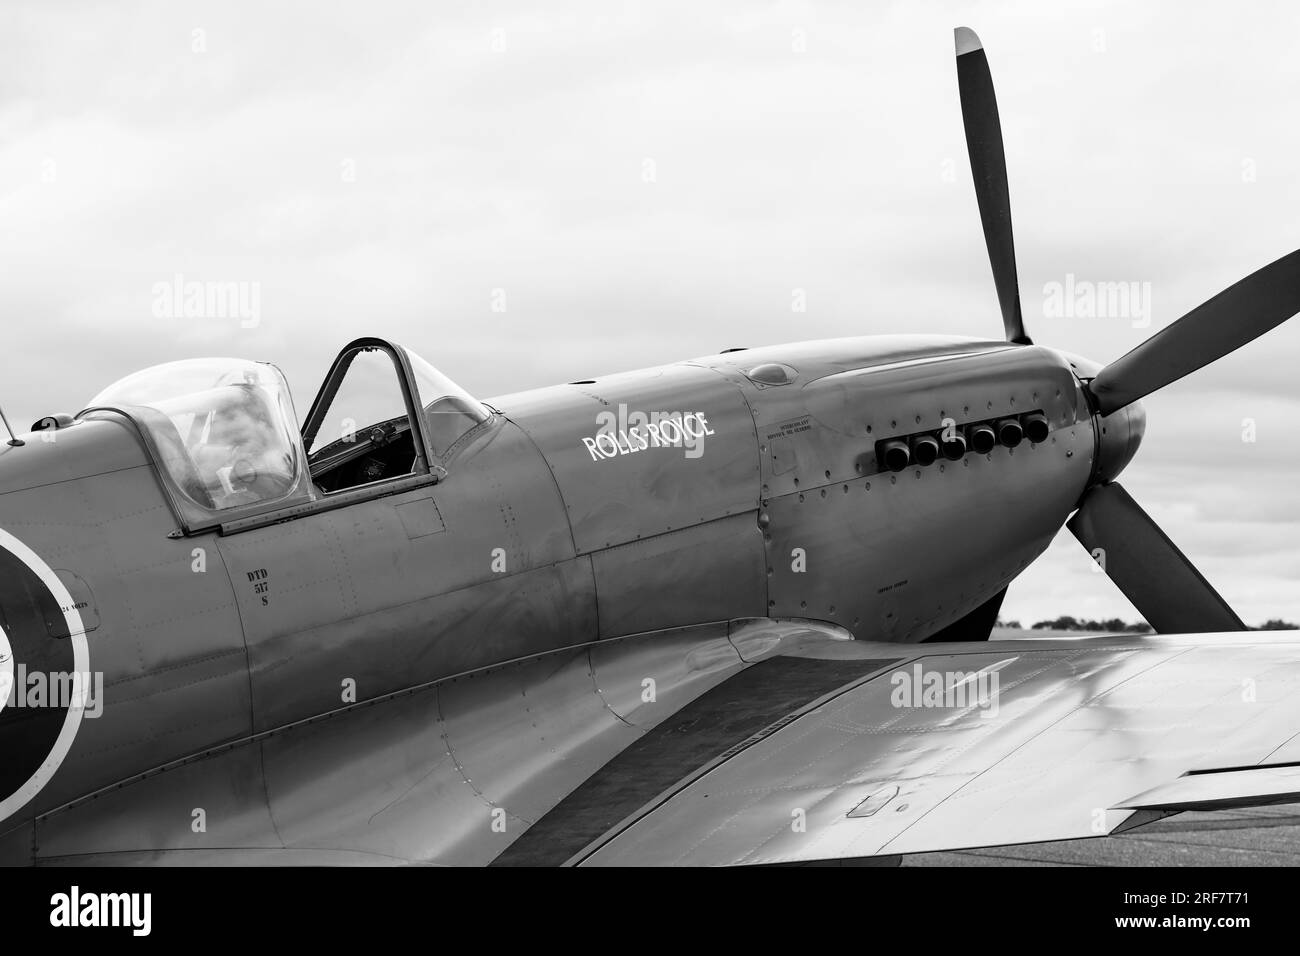 Supermarine Spitfire photo reconnaissance PRXIX of the Rolls Royce Heritage Trust on the ground. Monochrome black and white. Stock Photo